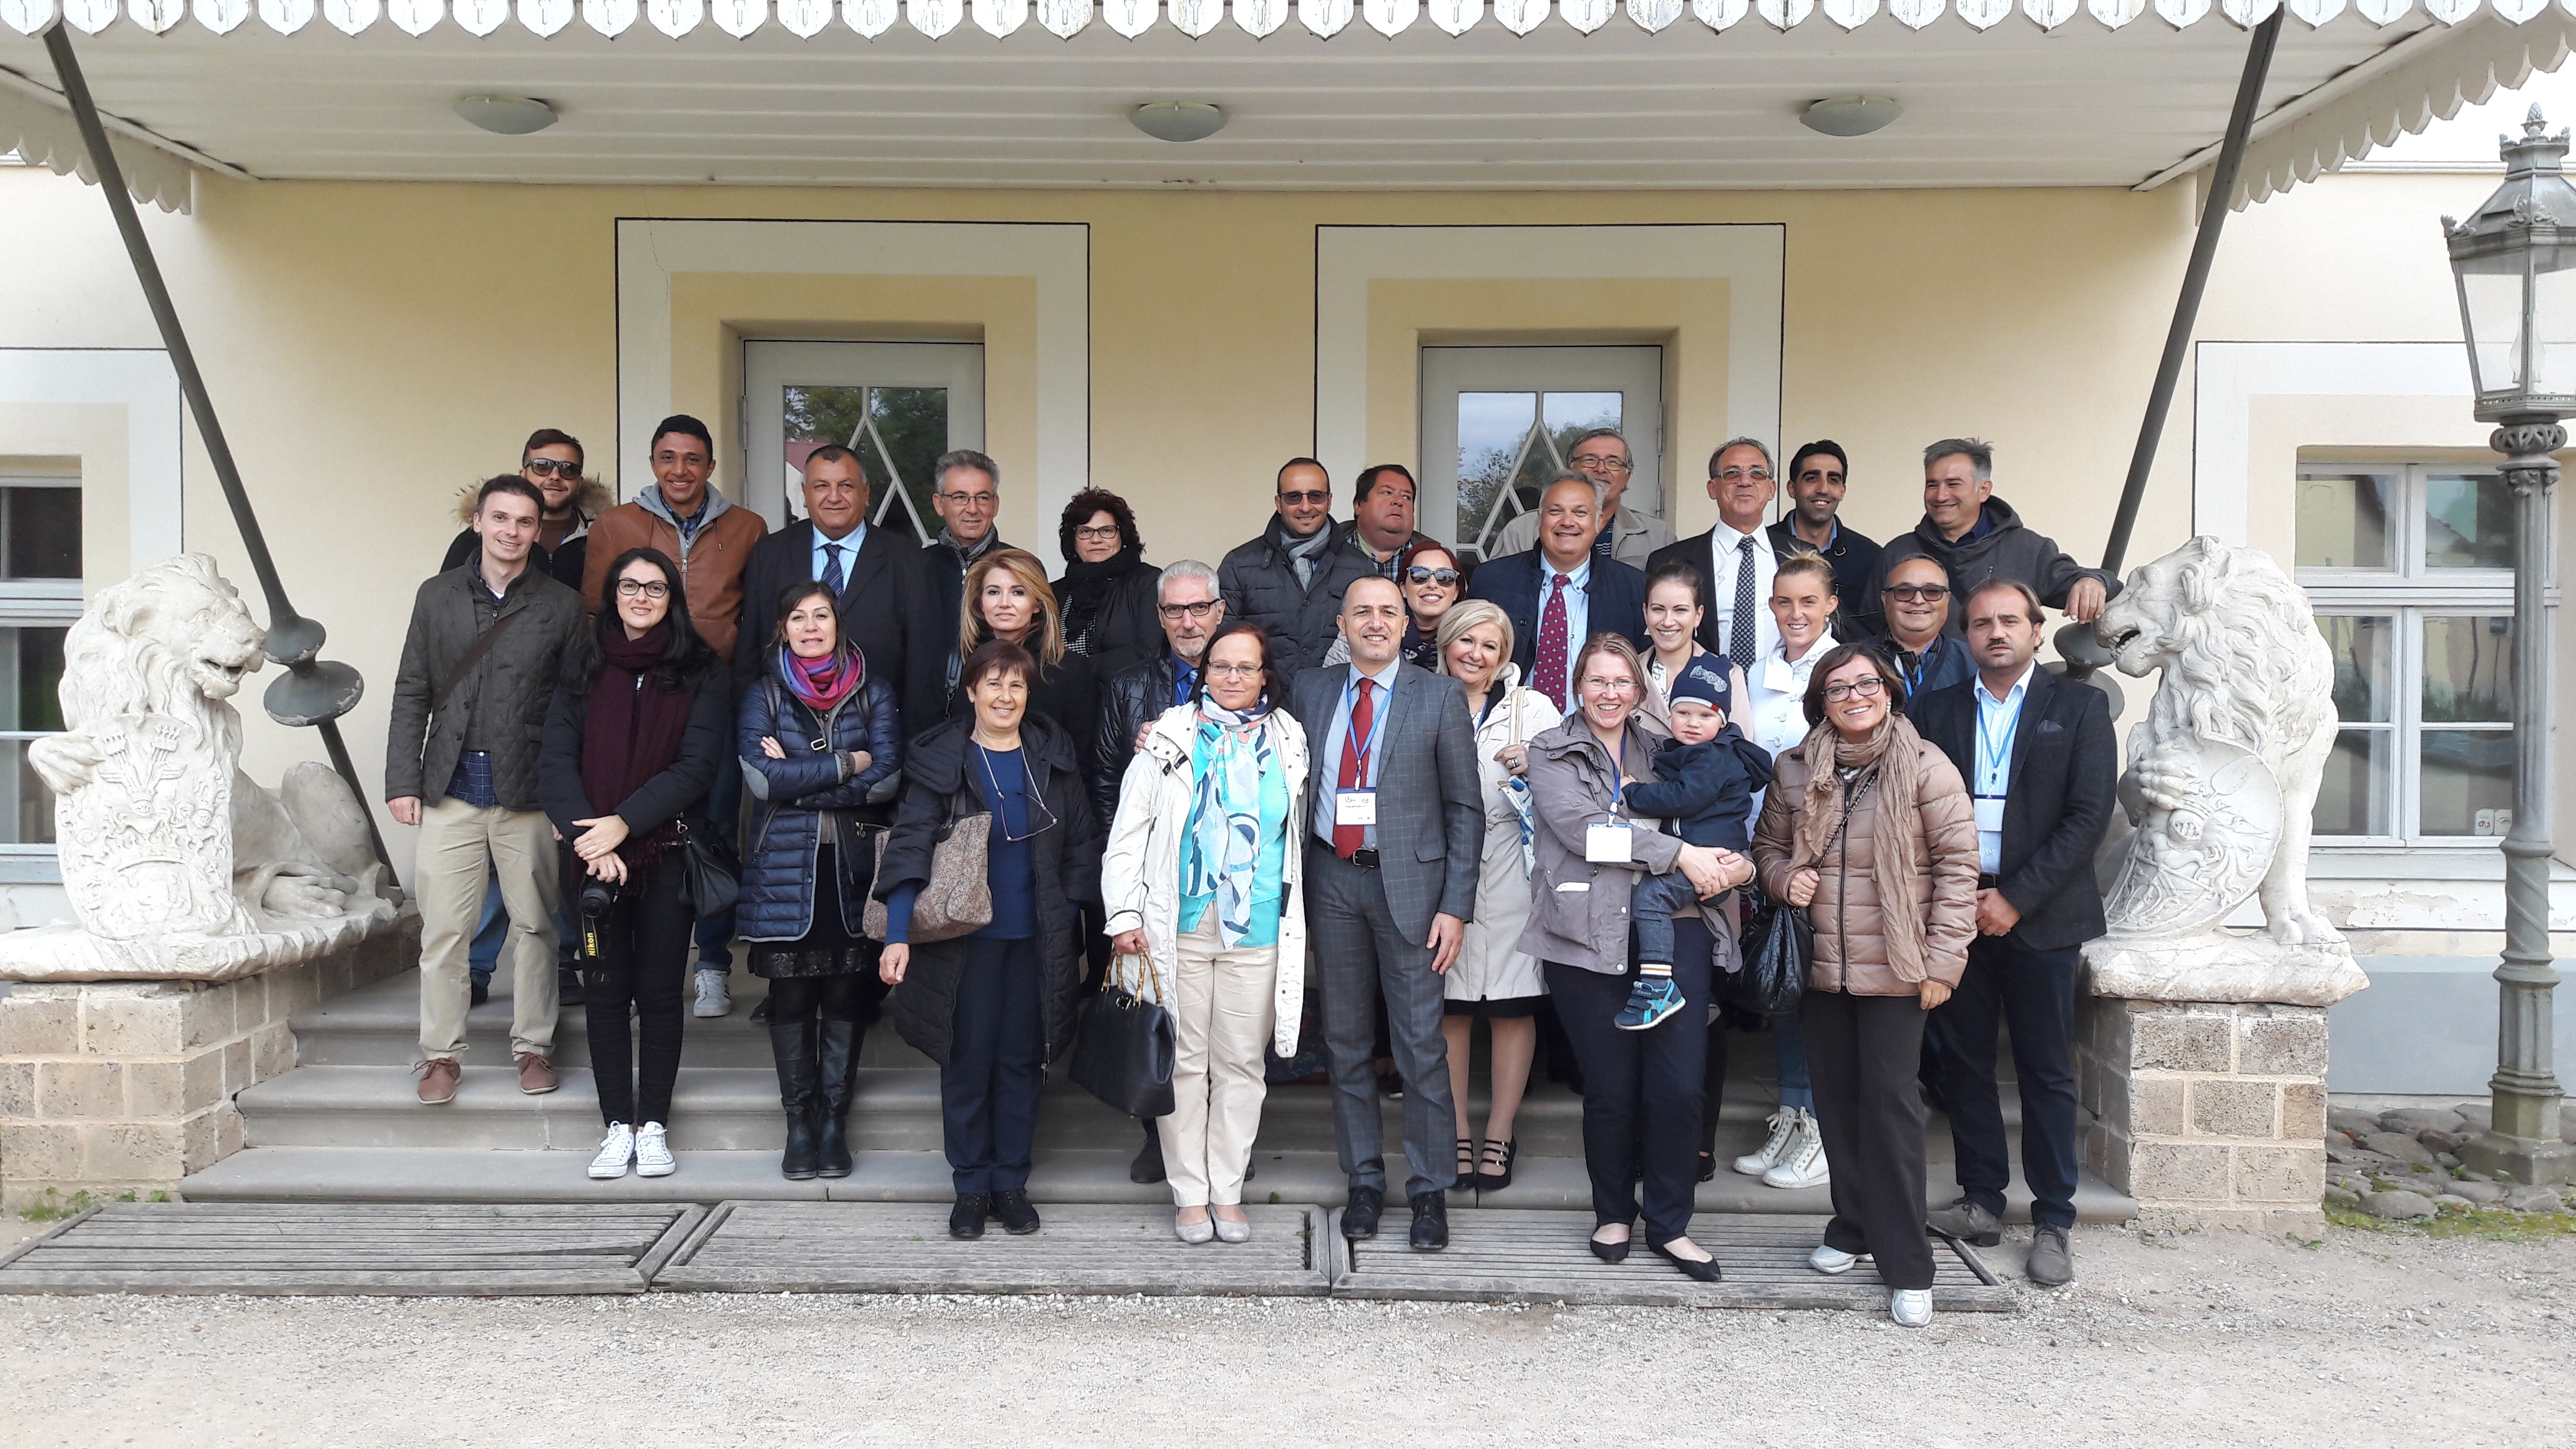 Projekta ''WELCOME - Welcoming network for migrant rights and European citizenship" kopsavilkums